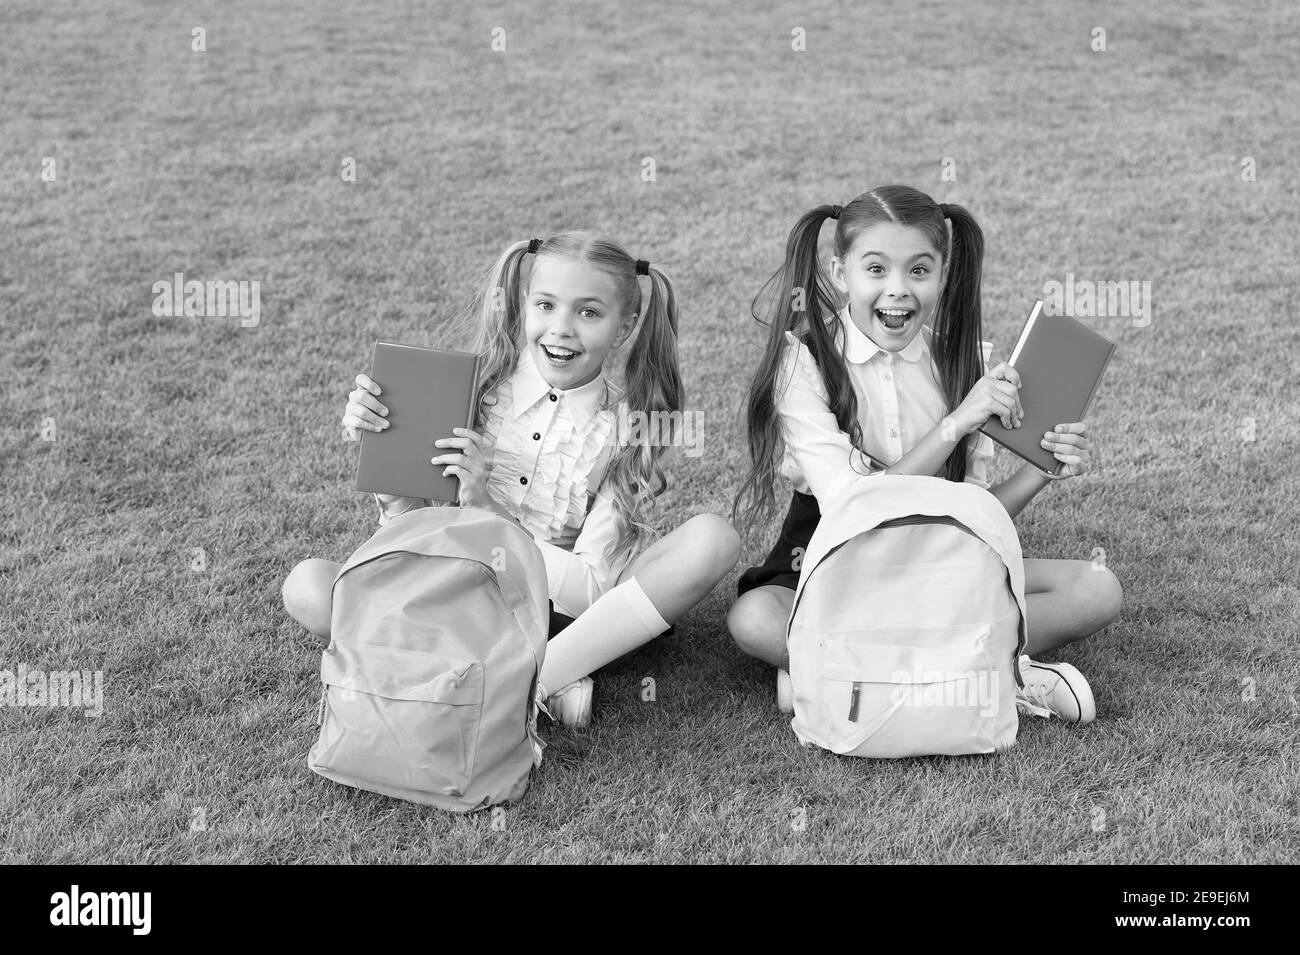 Books are best friends. Happy kids hold books outdoors. Adorable bookworms on green grass. School library. Literature and language. English grammar. Education and knowledge. Books about friendship. Stock Photo